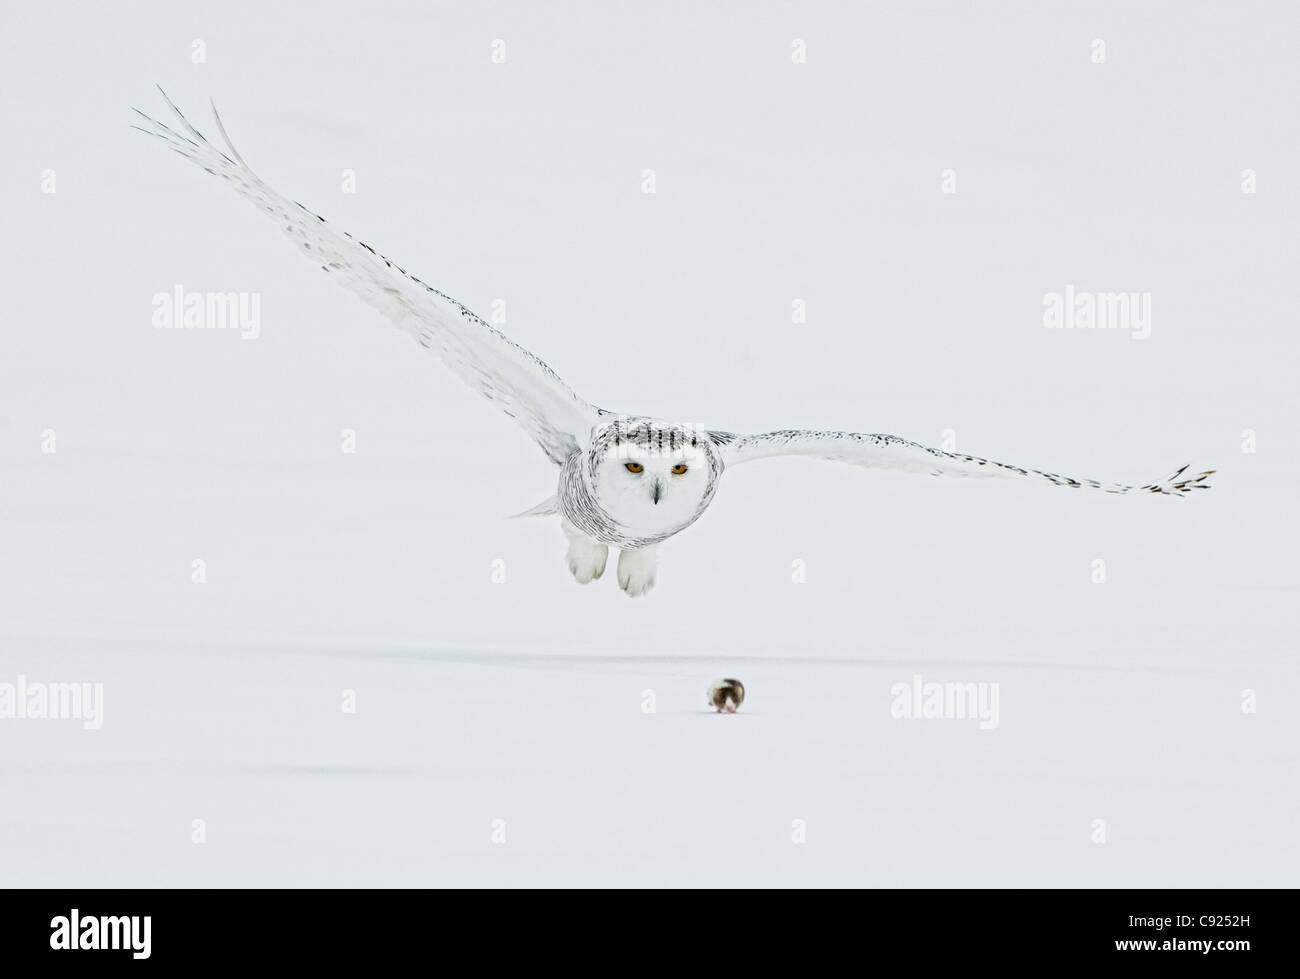 Female Snowy Owl swoops down to catch a lemming on top of the snow, Saint-Barthelemy, Quebec, Canada, Winter Stock Photo